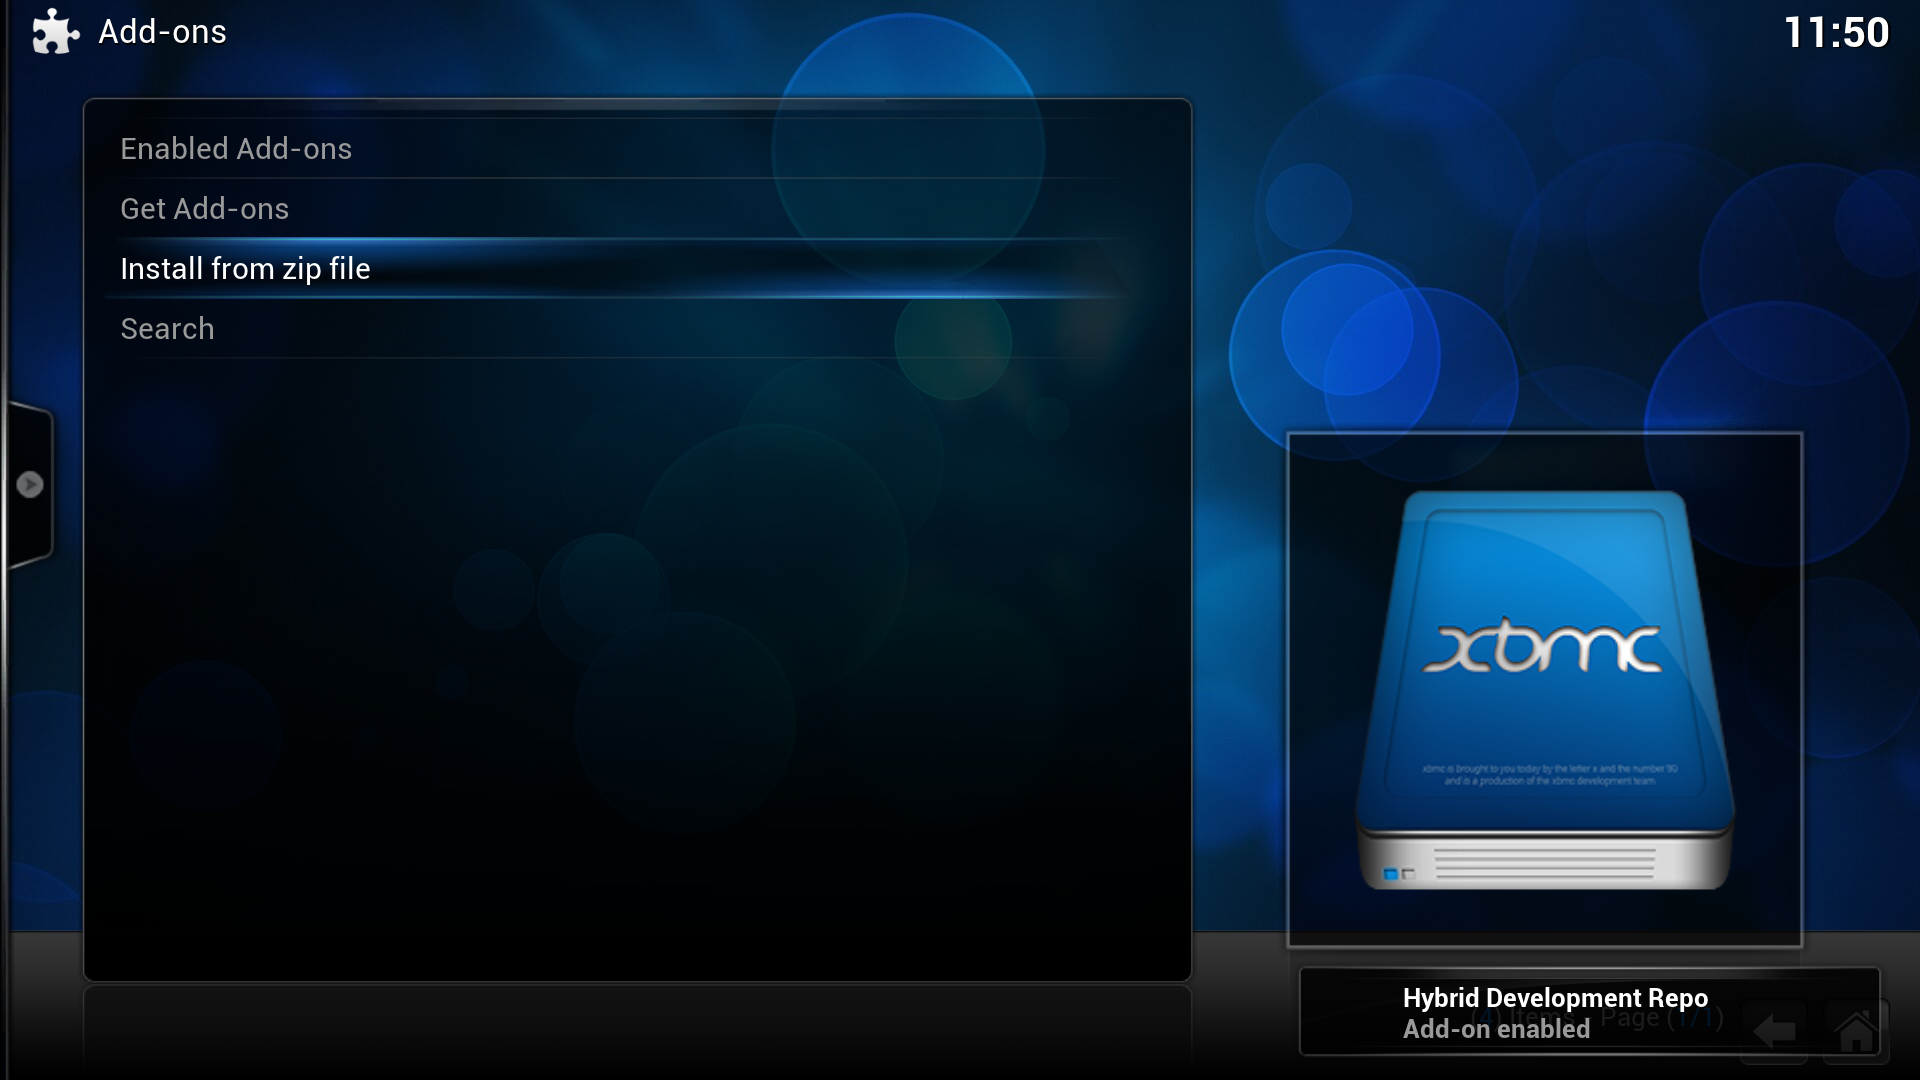 Step 3: In the bottom right, XBMC notifies when the add-on is installed and enabled.